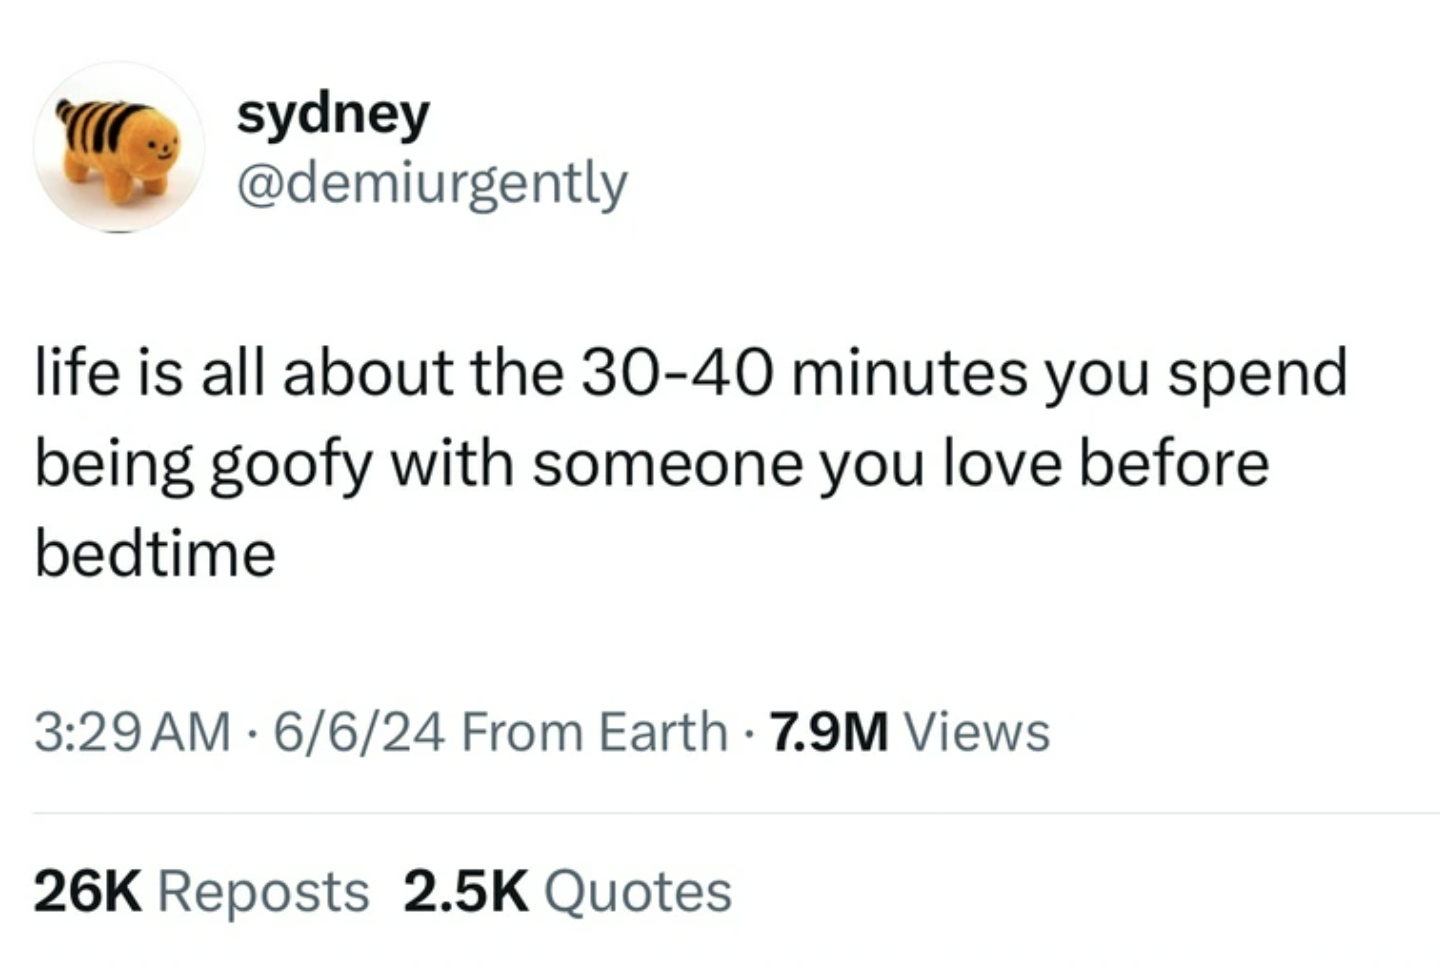 screenshot - sydney life is all about the 3040 minutes you spend being goofy with someone you love before bedtime 6624 From Earth 7.9M Views 26K Reposts Quotes